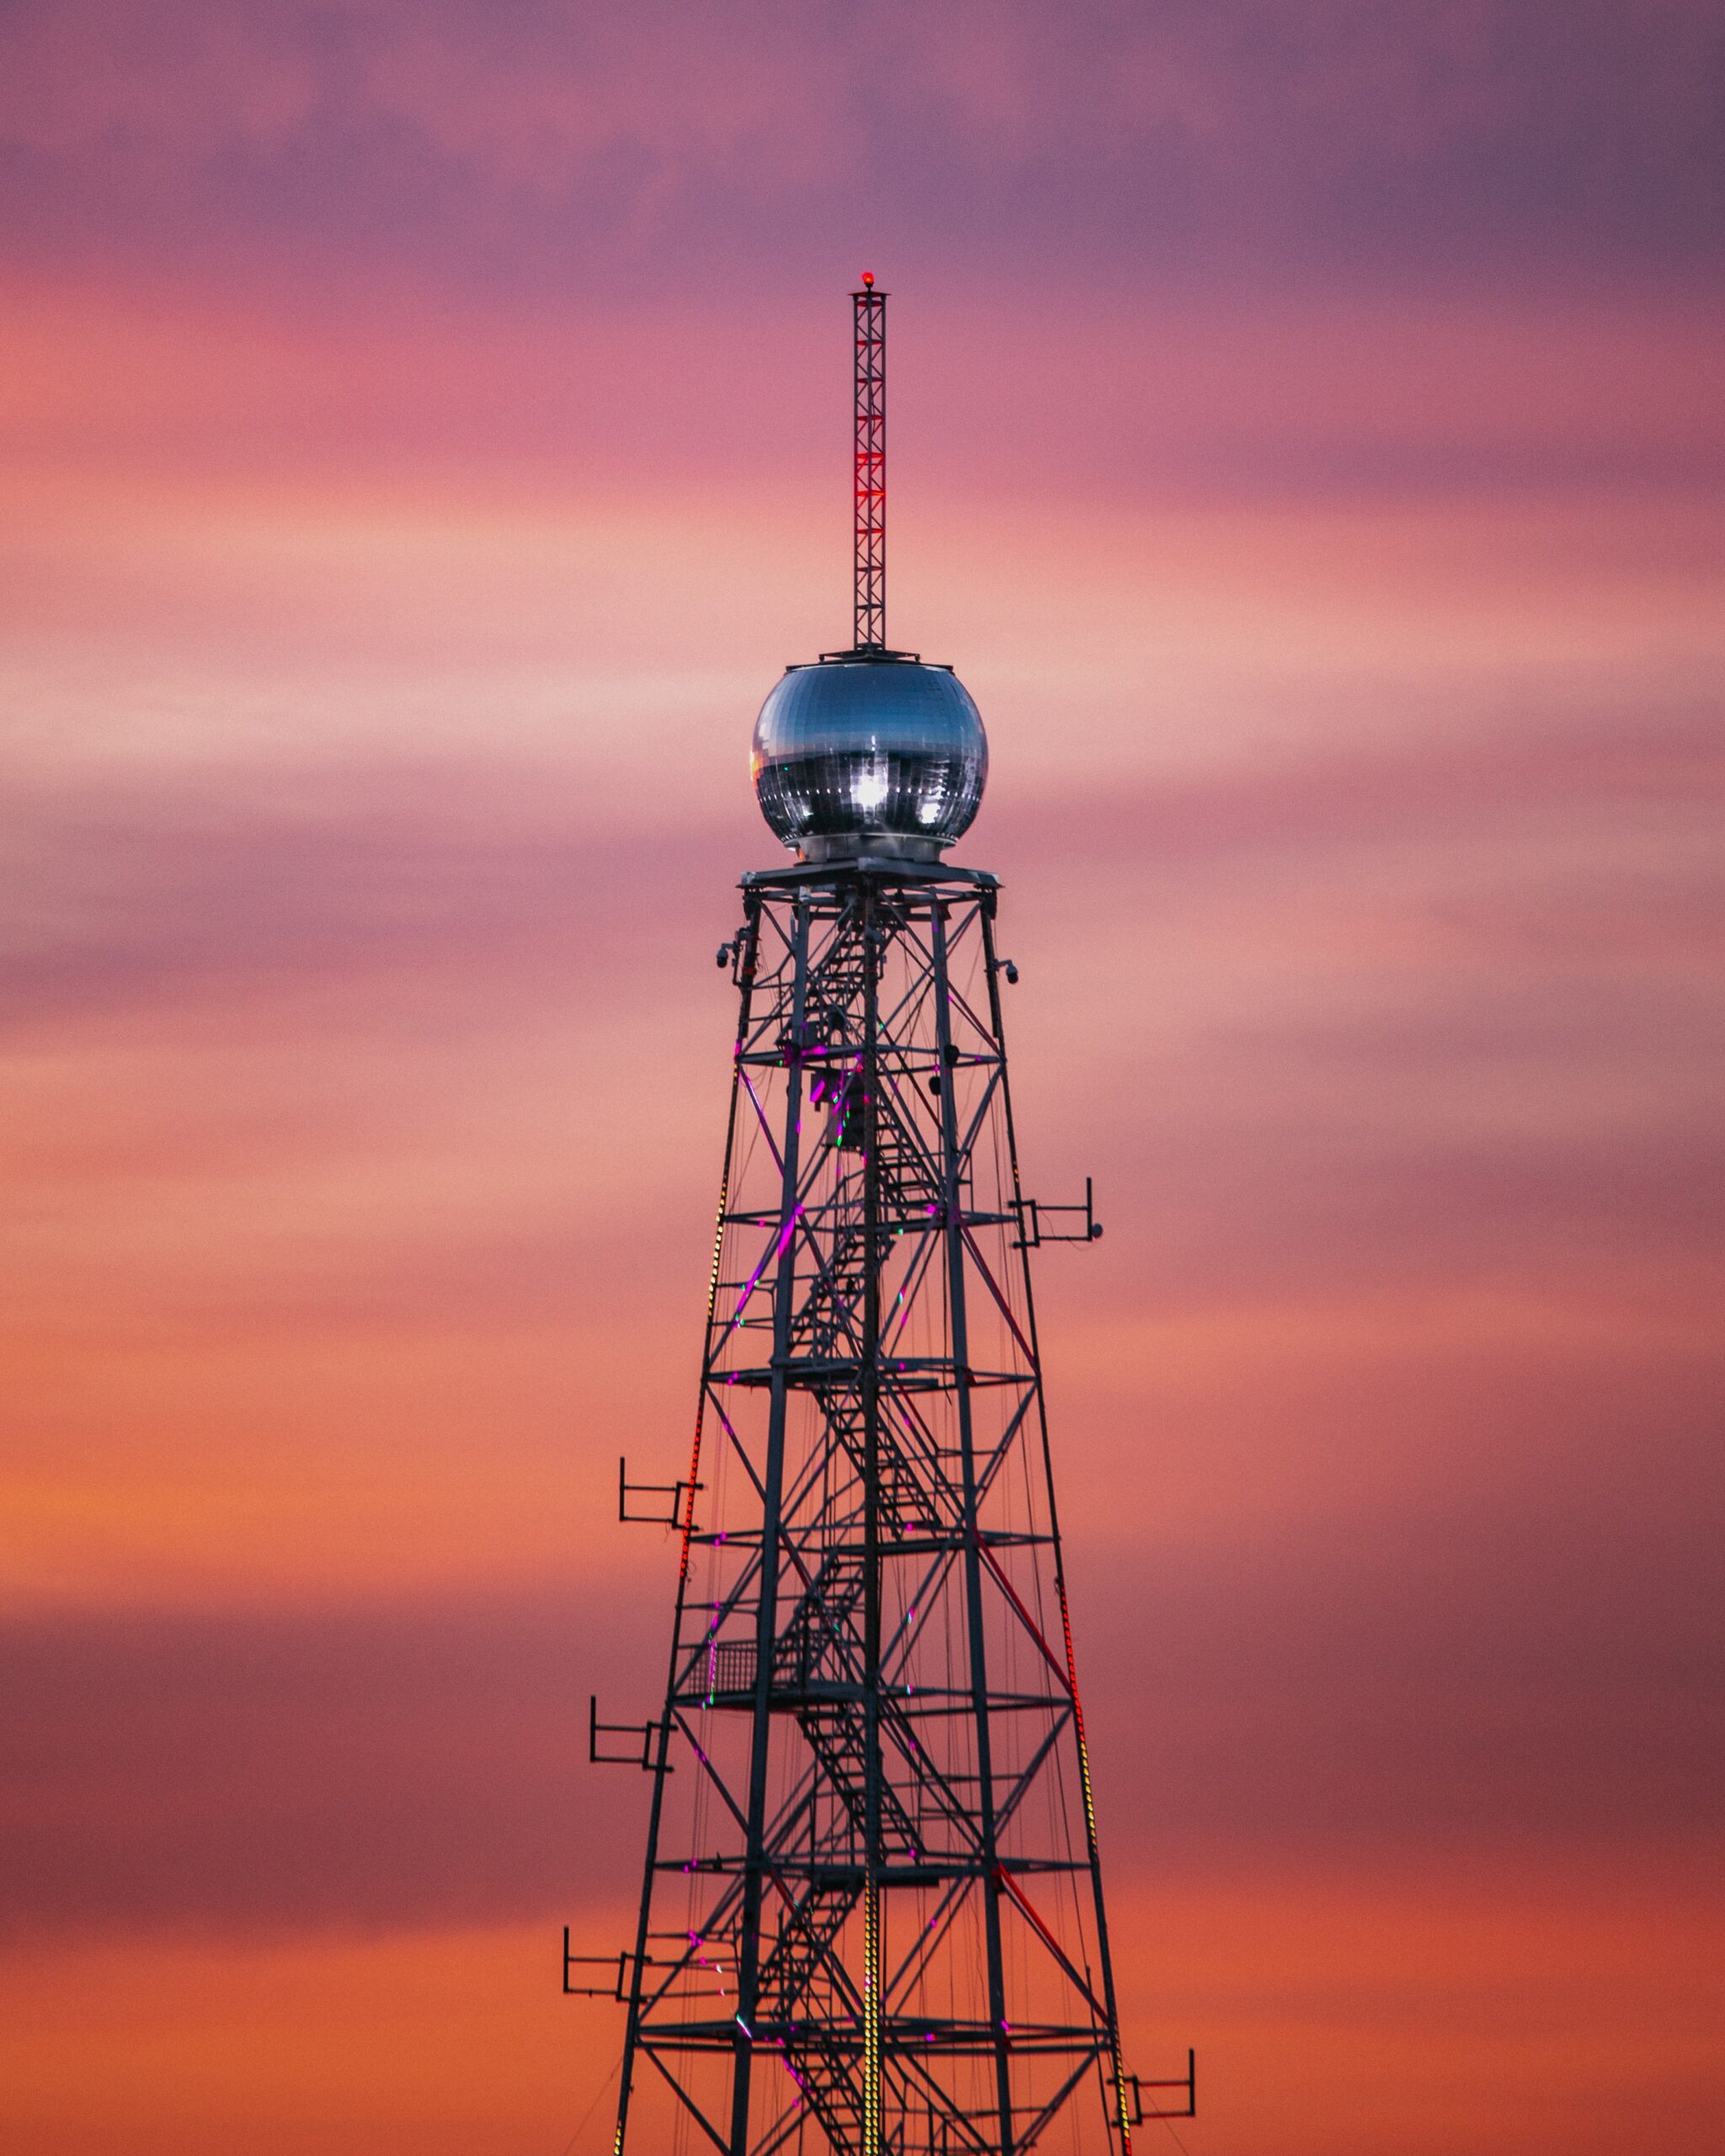 New bracing system for telecommunication towers TECHNOLOGY